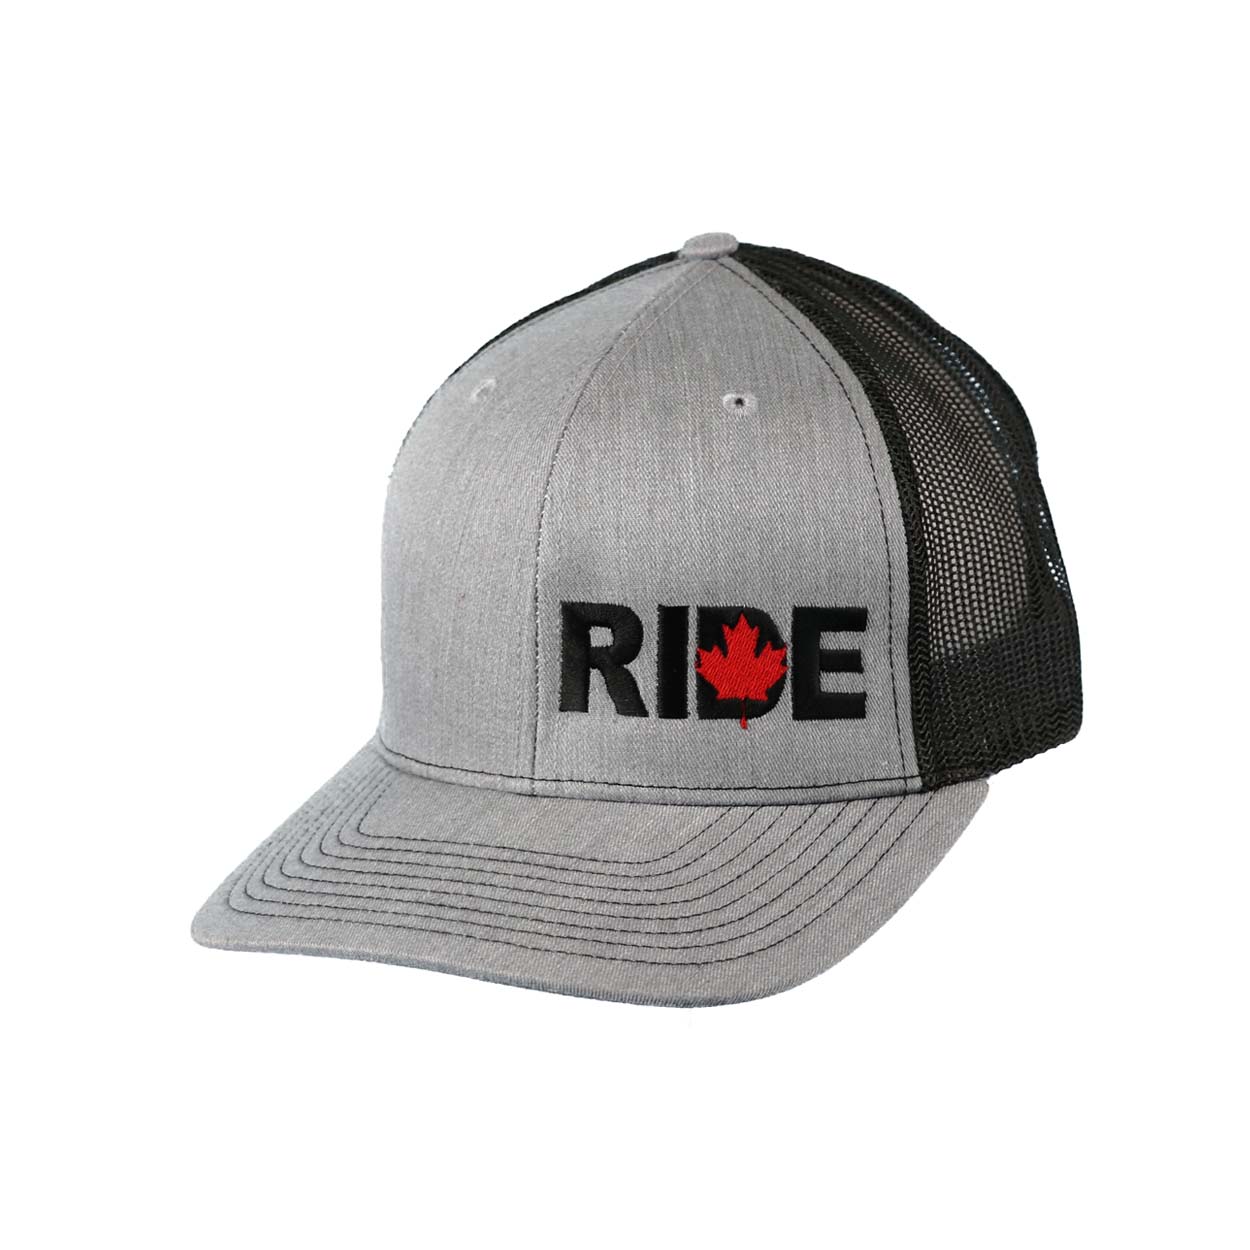 Ride Canada Classic Pro Night Out Embroidered Snapback Trucker Hat Heather Gray/Black